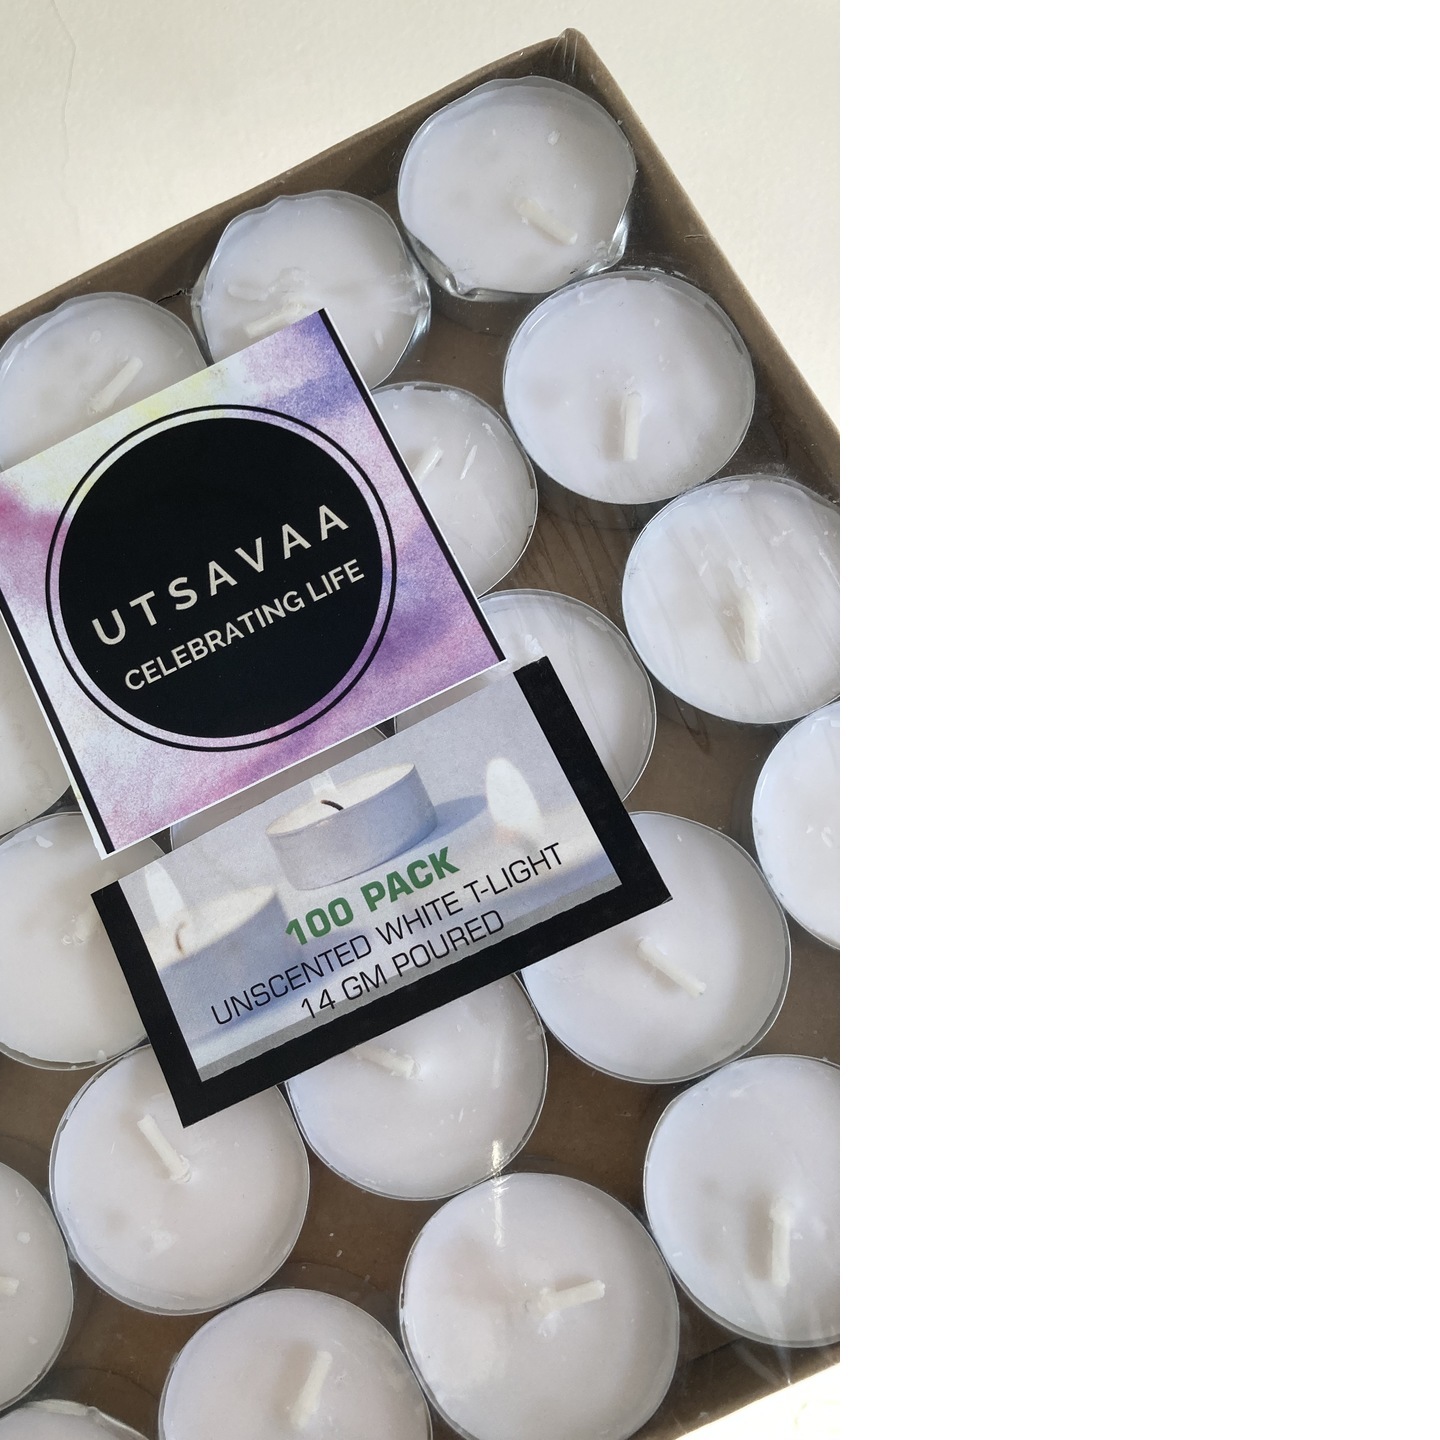 U T S A V A A - Unscented Tealight Candle - 100pc , 14g each